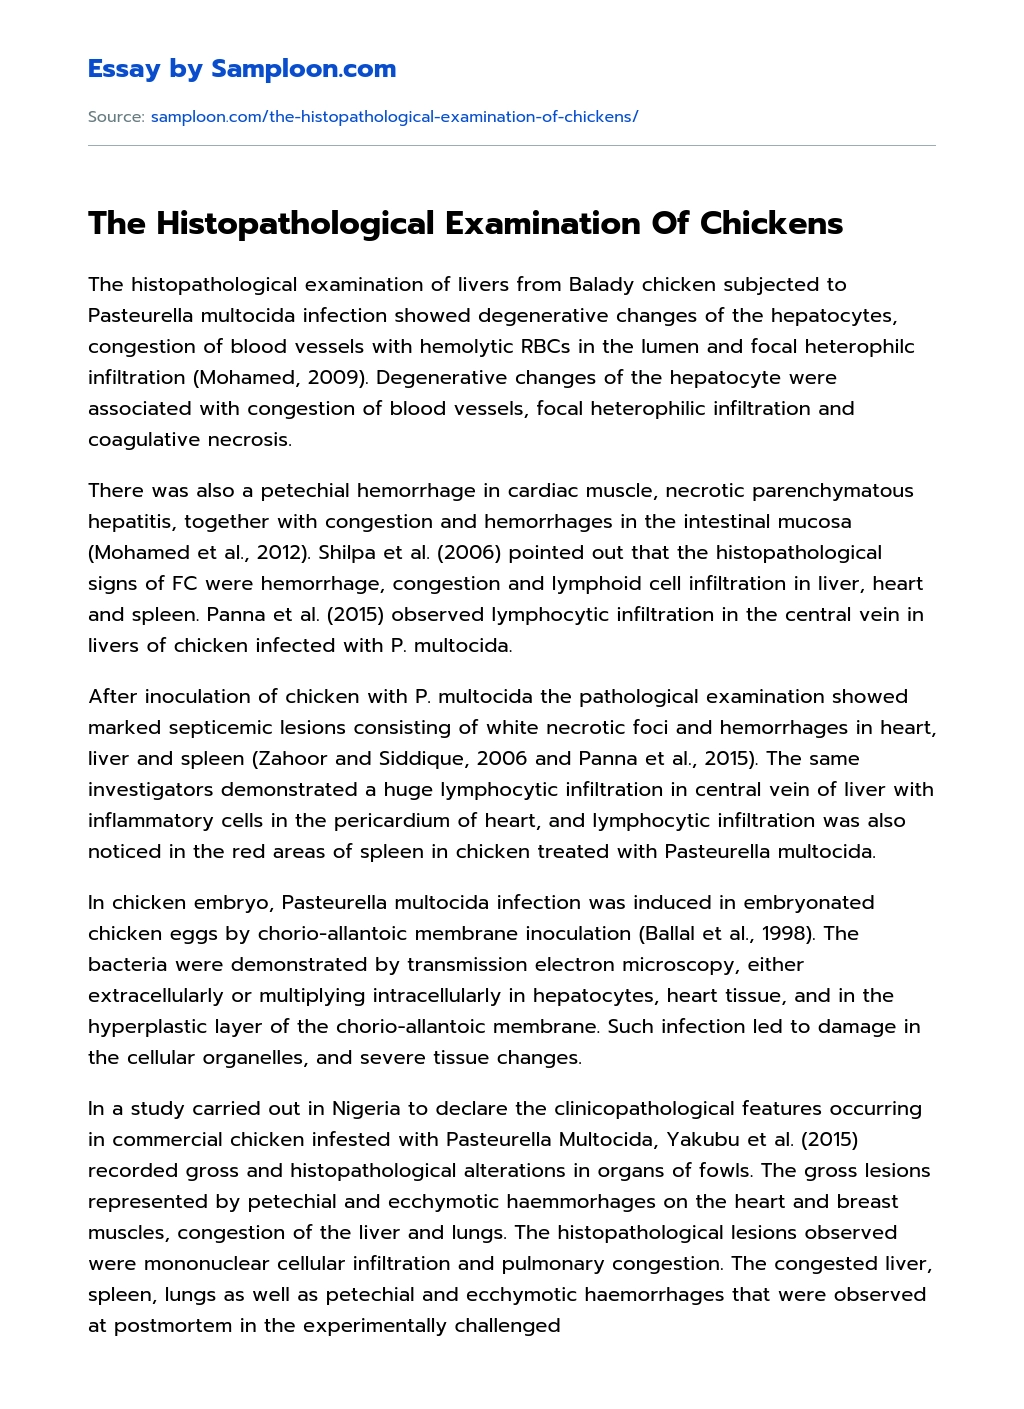 The Histopathological Examination Of Chickens Research Paper essay